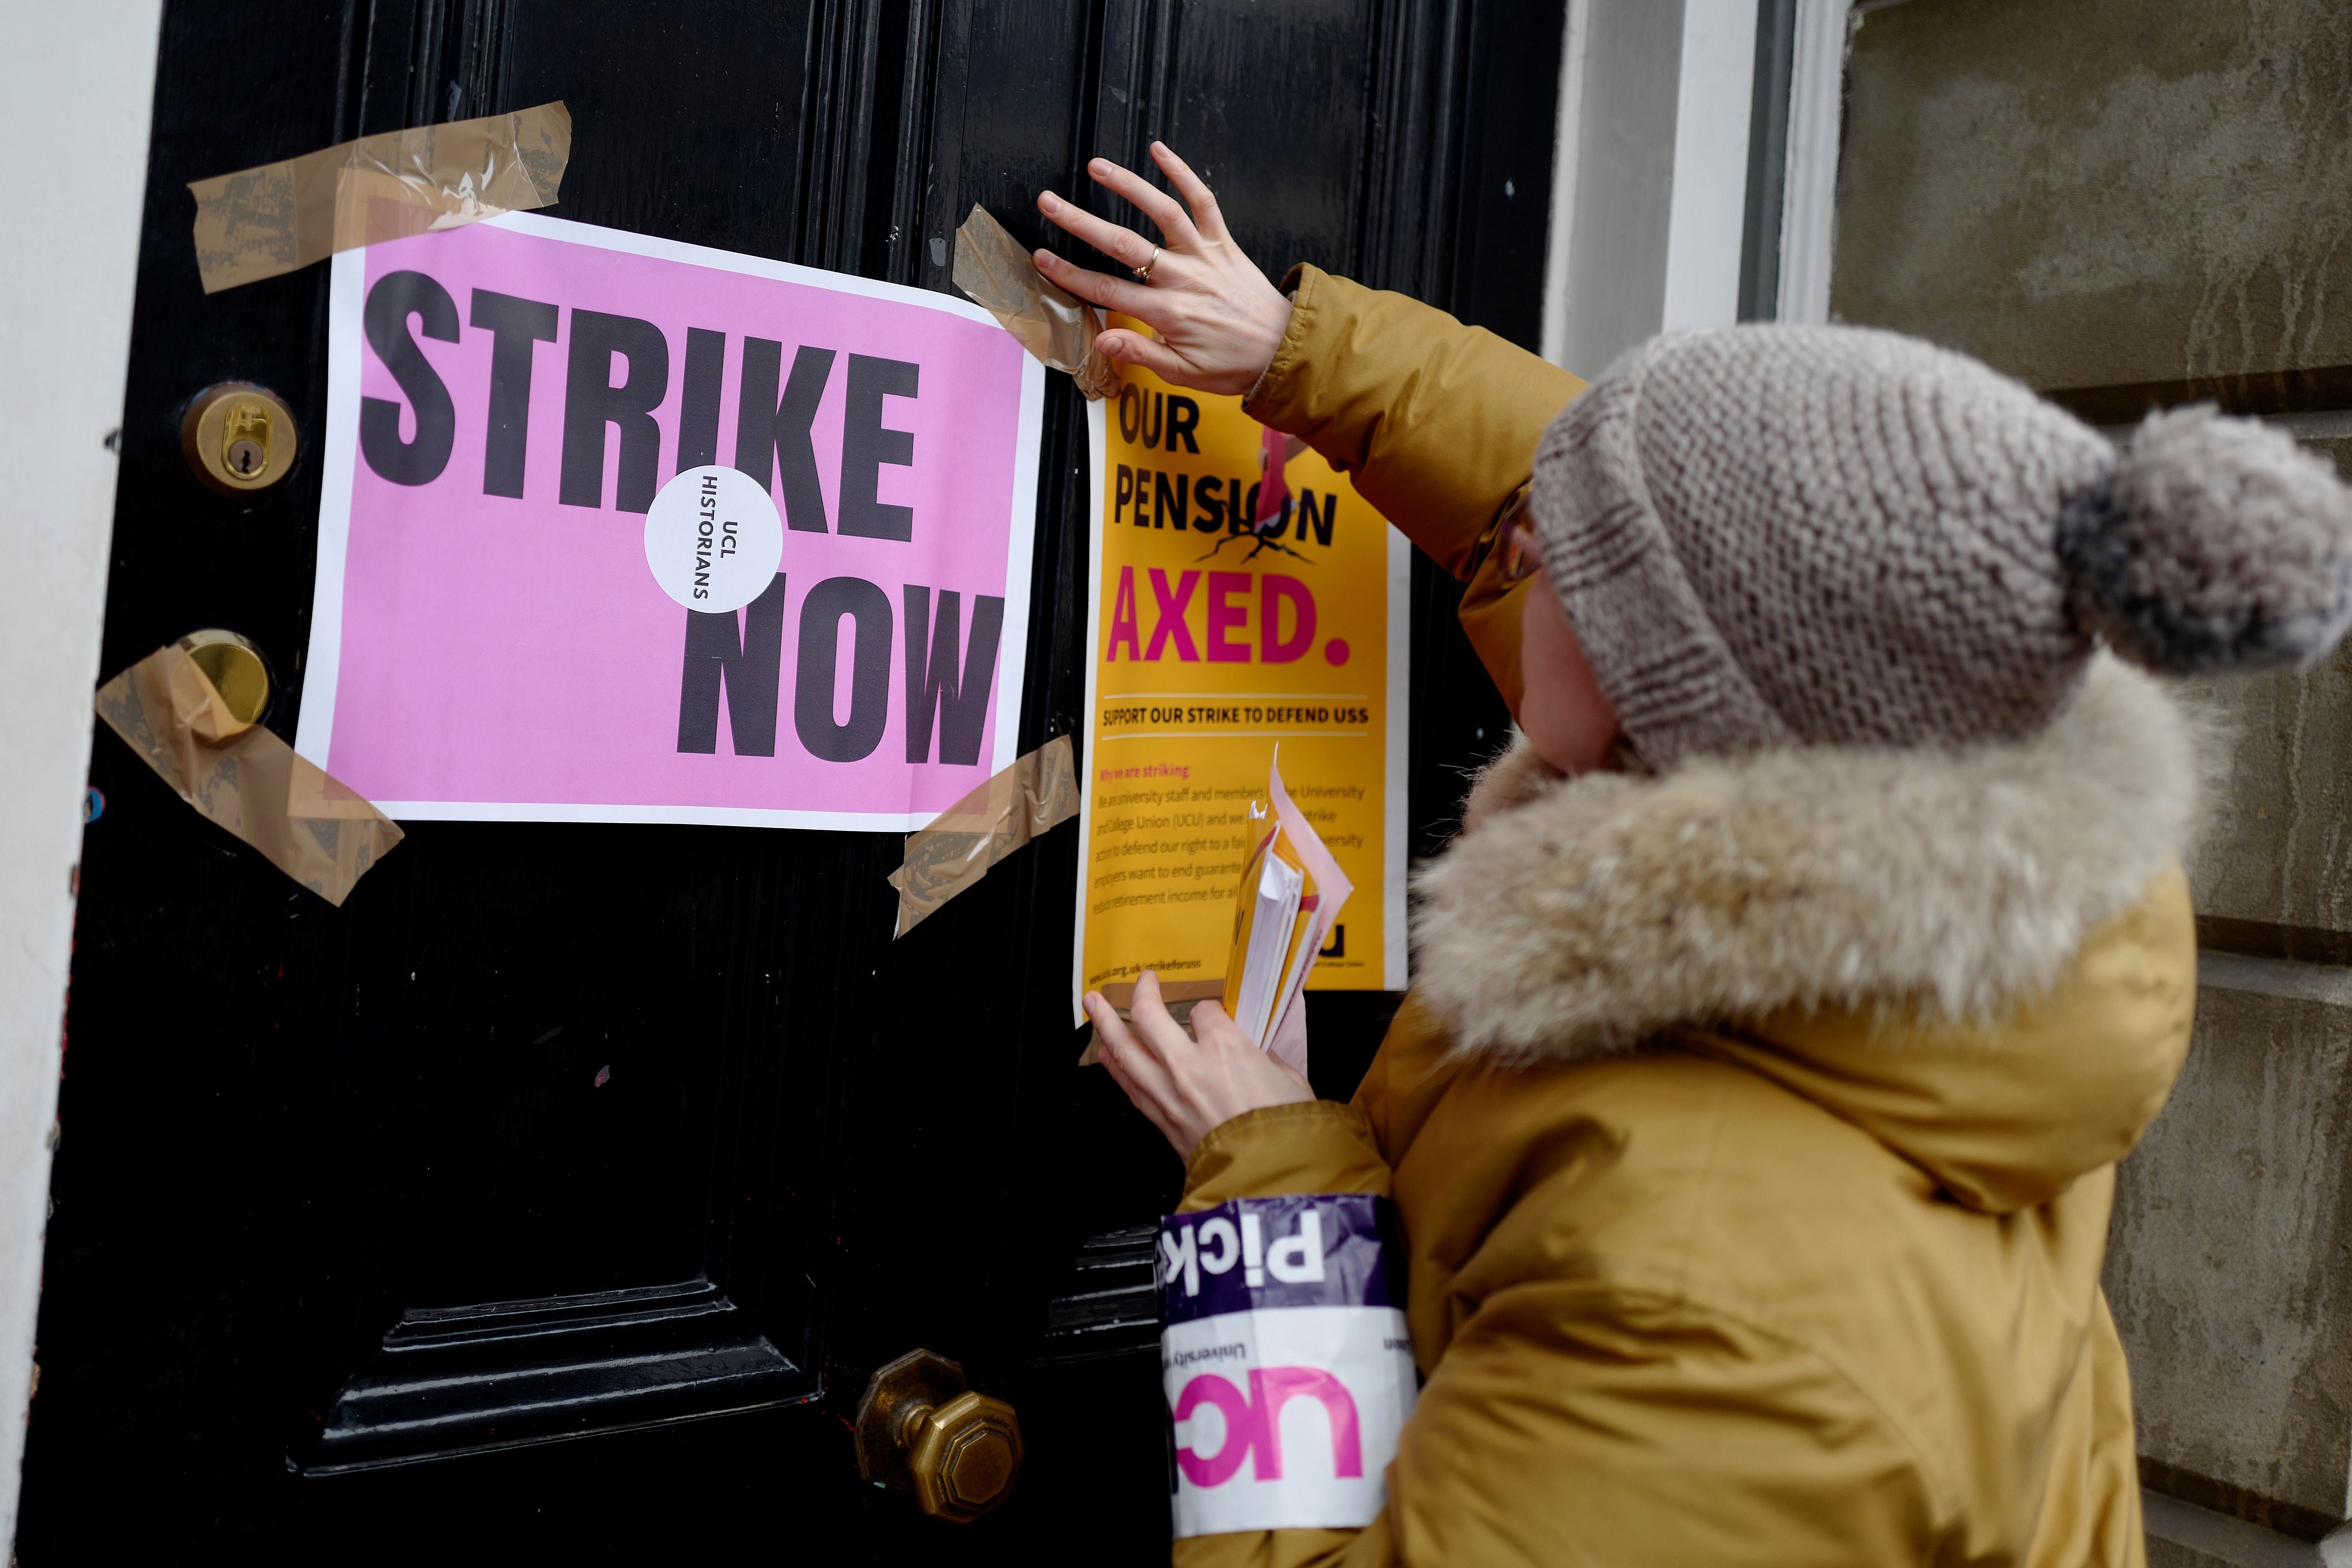 University staff across the country have gone on strike over pensions